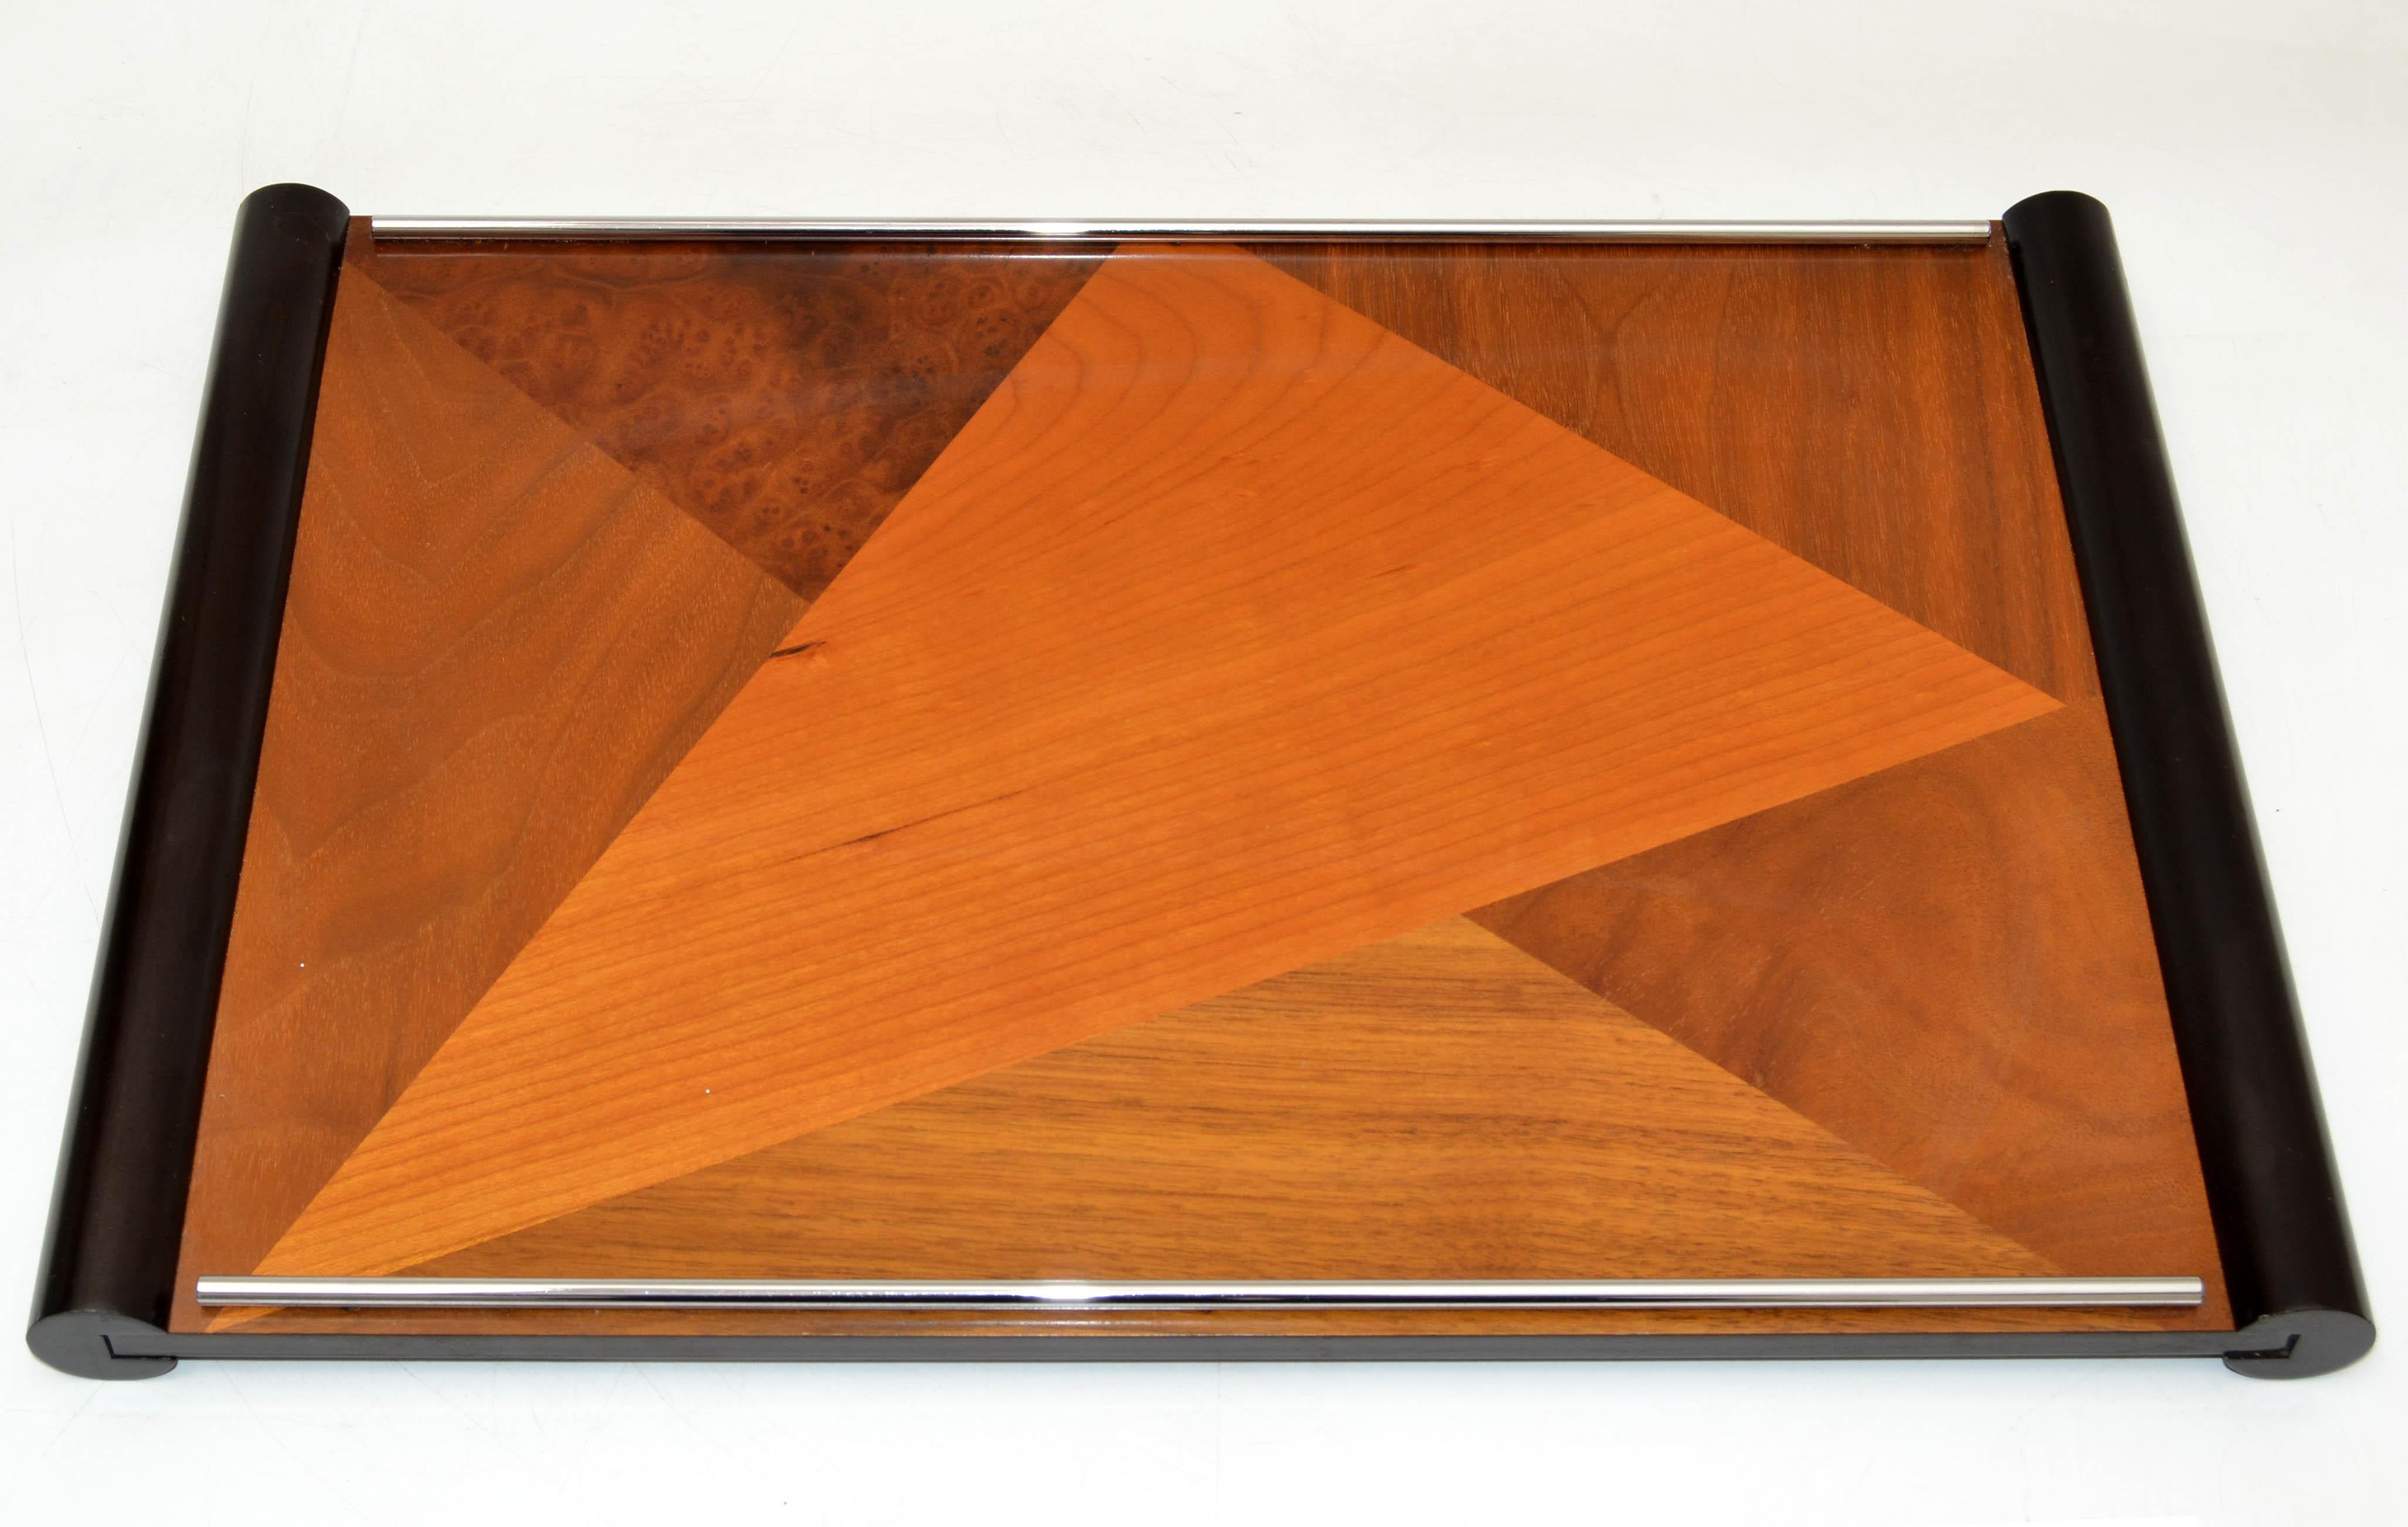 American Organic Modern Handcrafted Hardwood Marquetry Decorative Serving Tray In Good Condition For Sale In Miami, FL